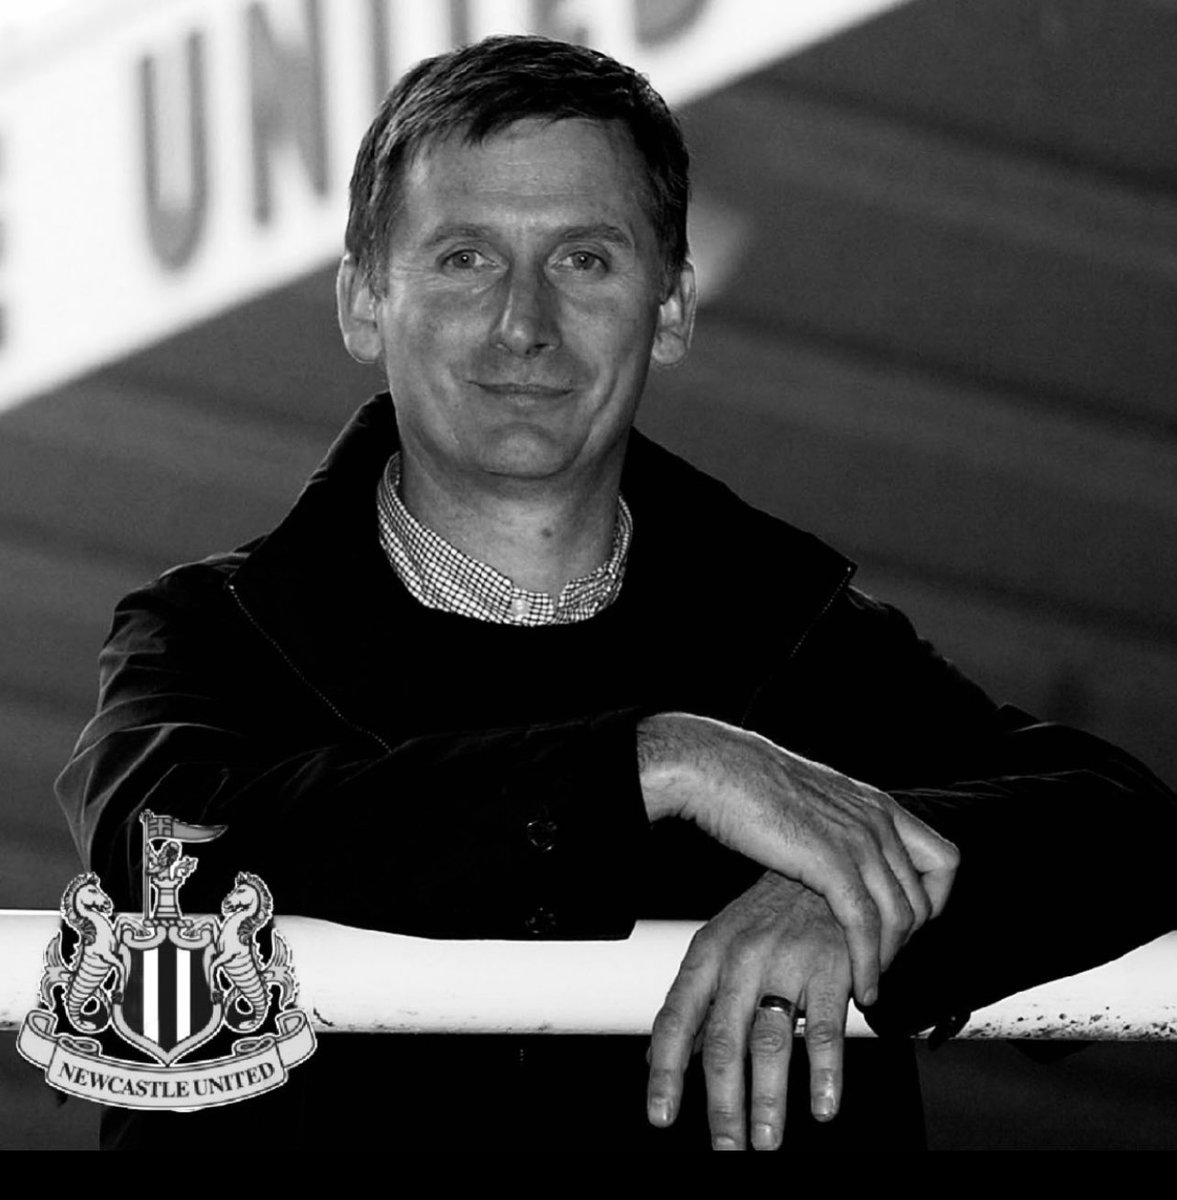 Sadly passed on this day in 2021: Former Newcastle United Captain & Manager Glen Roeder, An all round great man on and off the pitch, taken too early🙏